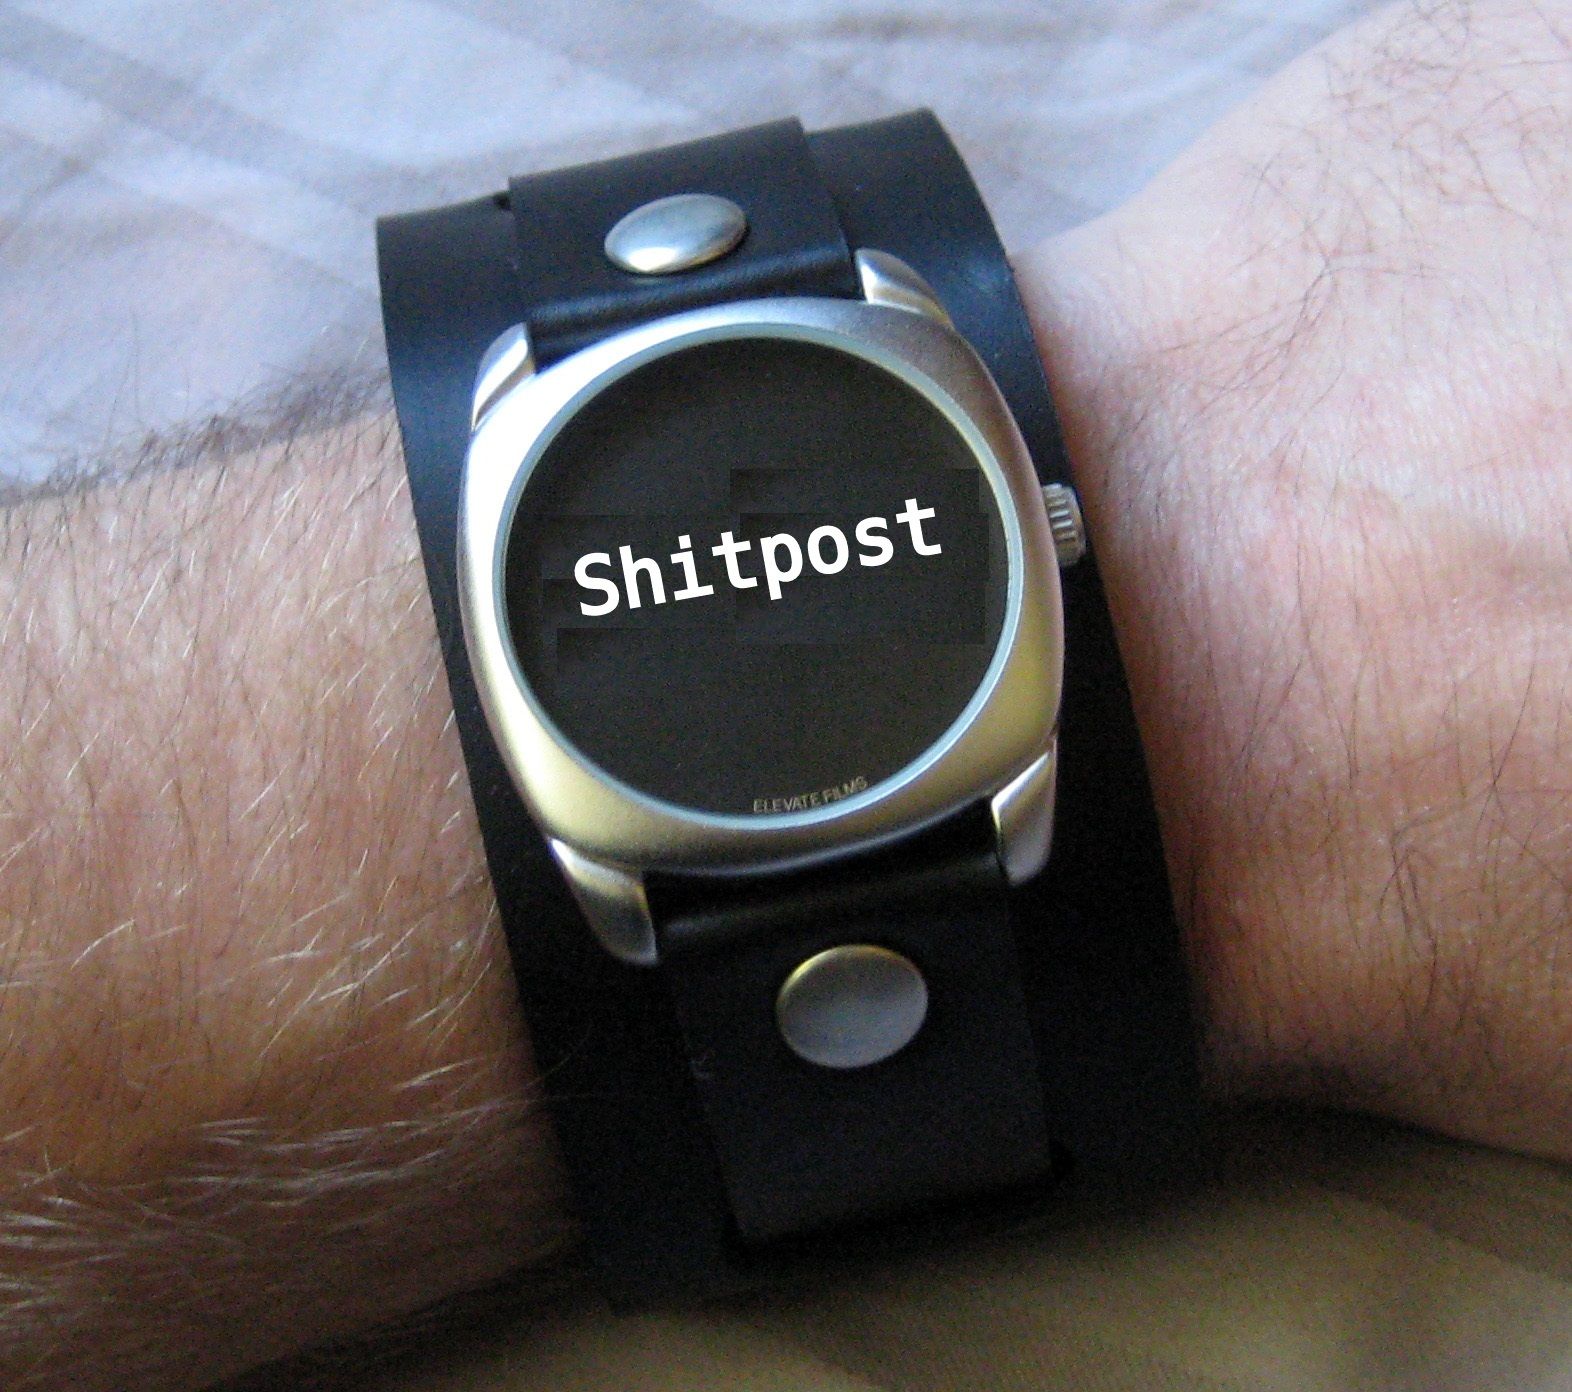 Oh my, look at the time!